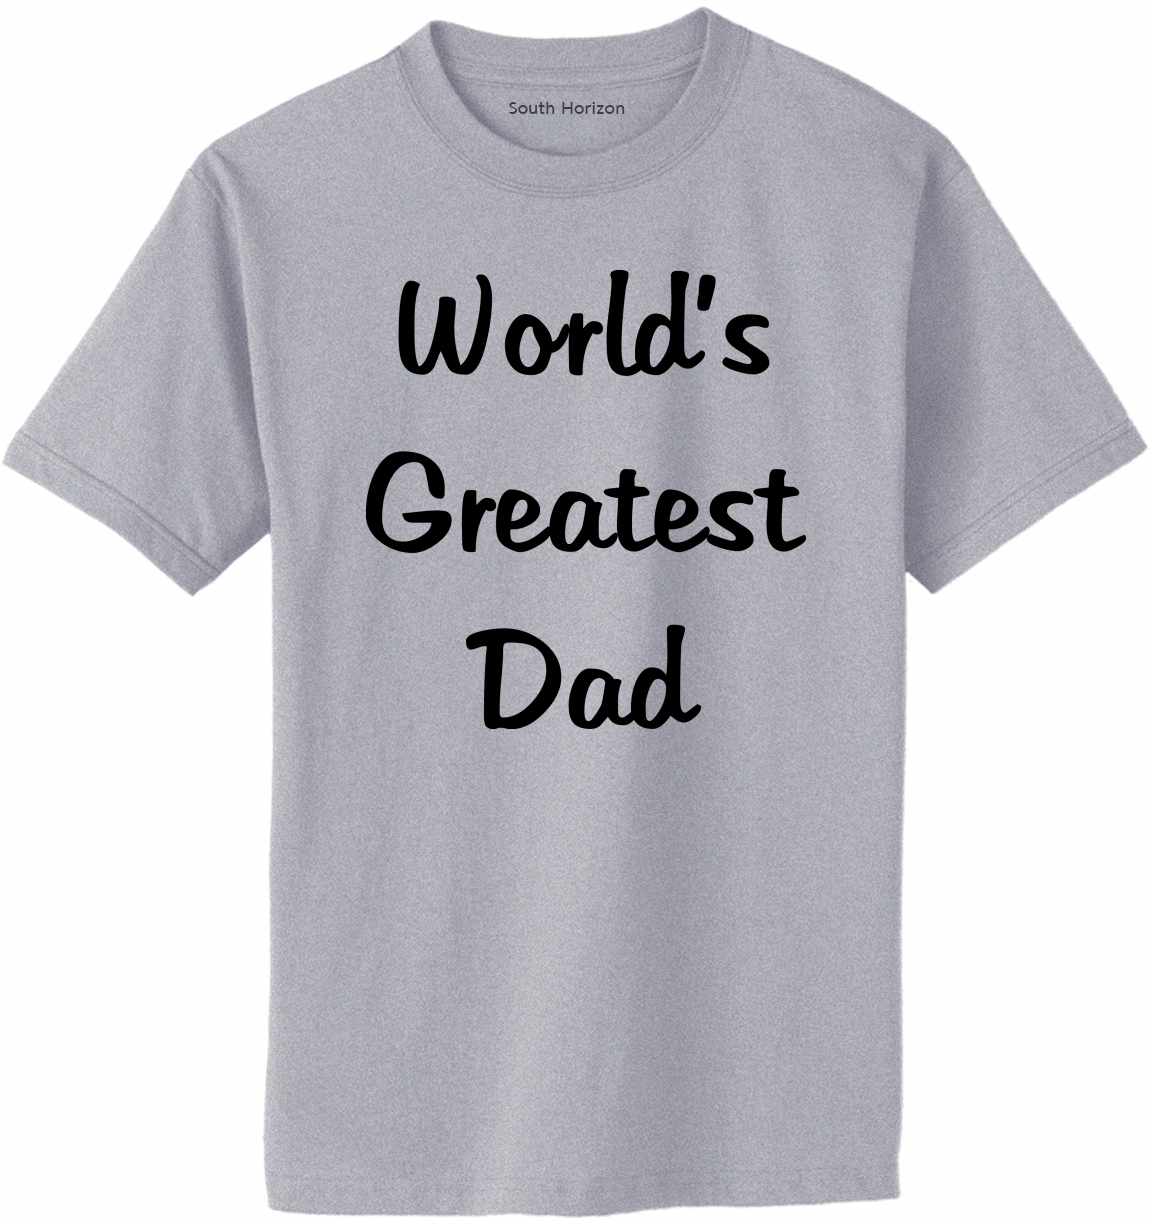 World's Greatest Dad Adult T-Shirt (#449-1)